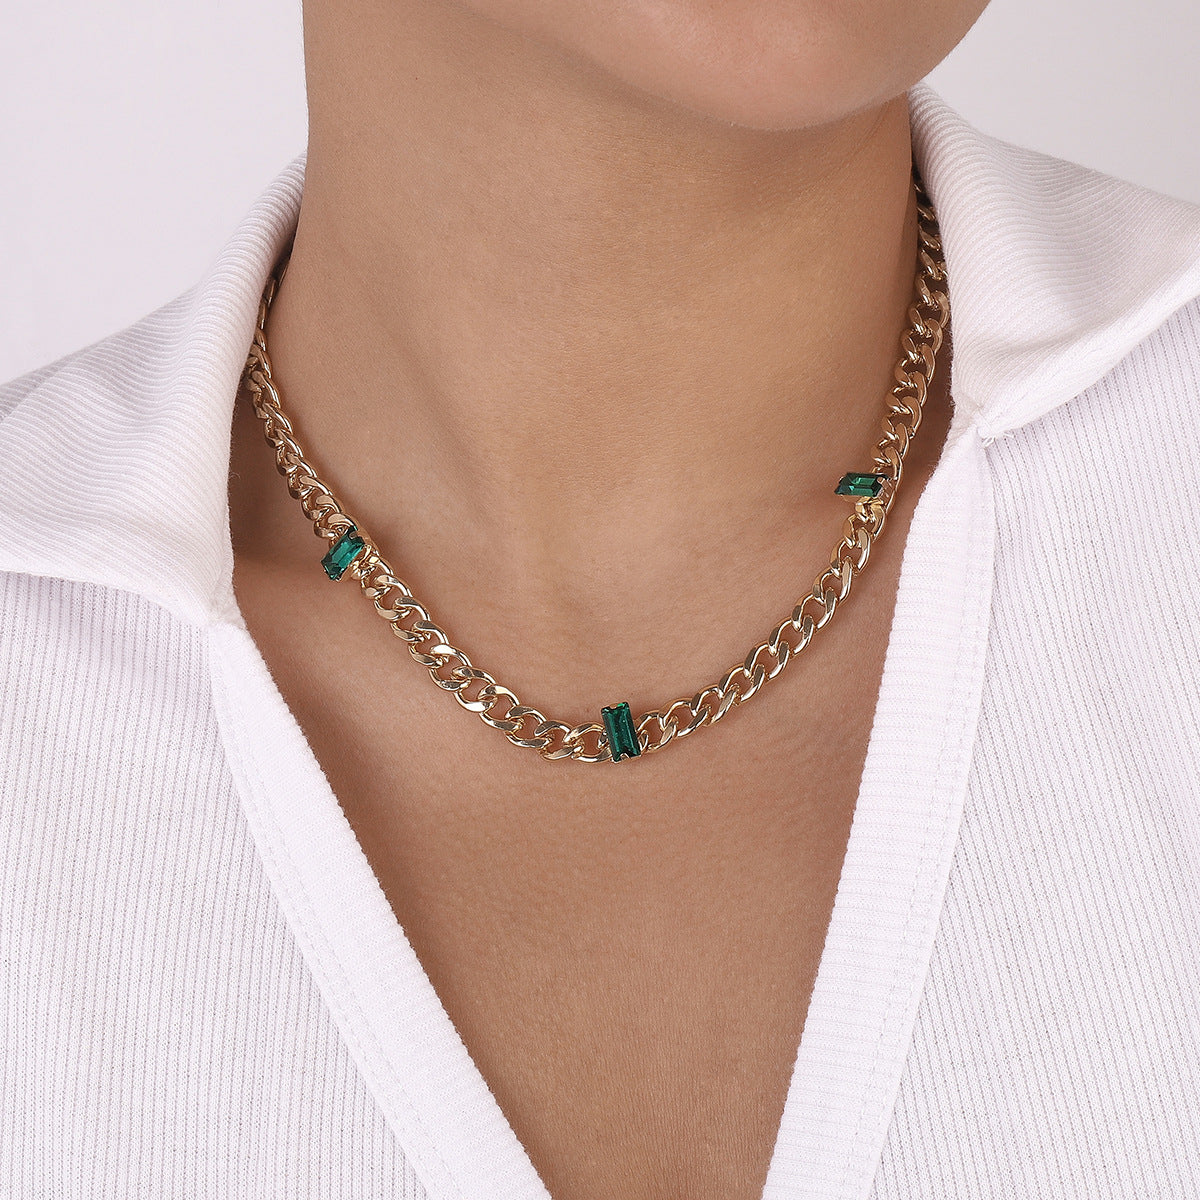 Green Crystal & 18K Gold-Plated Curb Chain